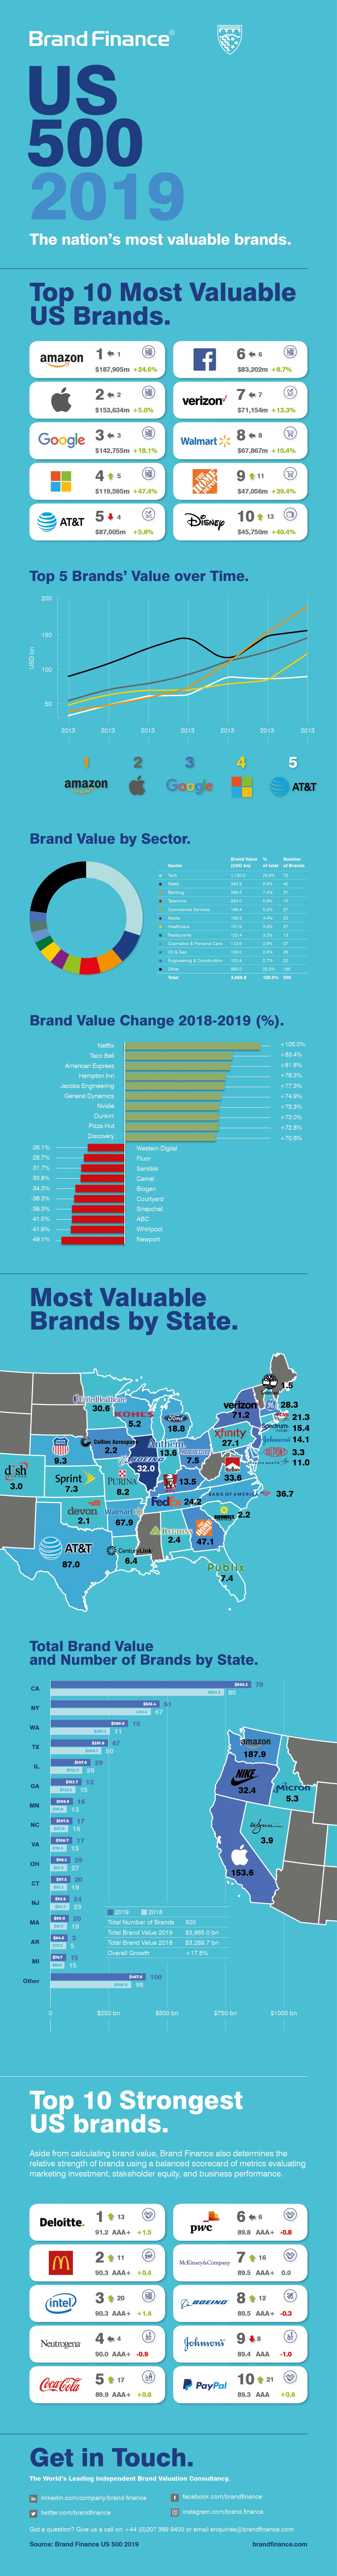 The fastest-growing American brands of 2019—which iconic company leads the pack?